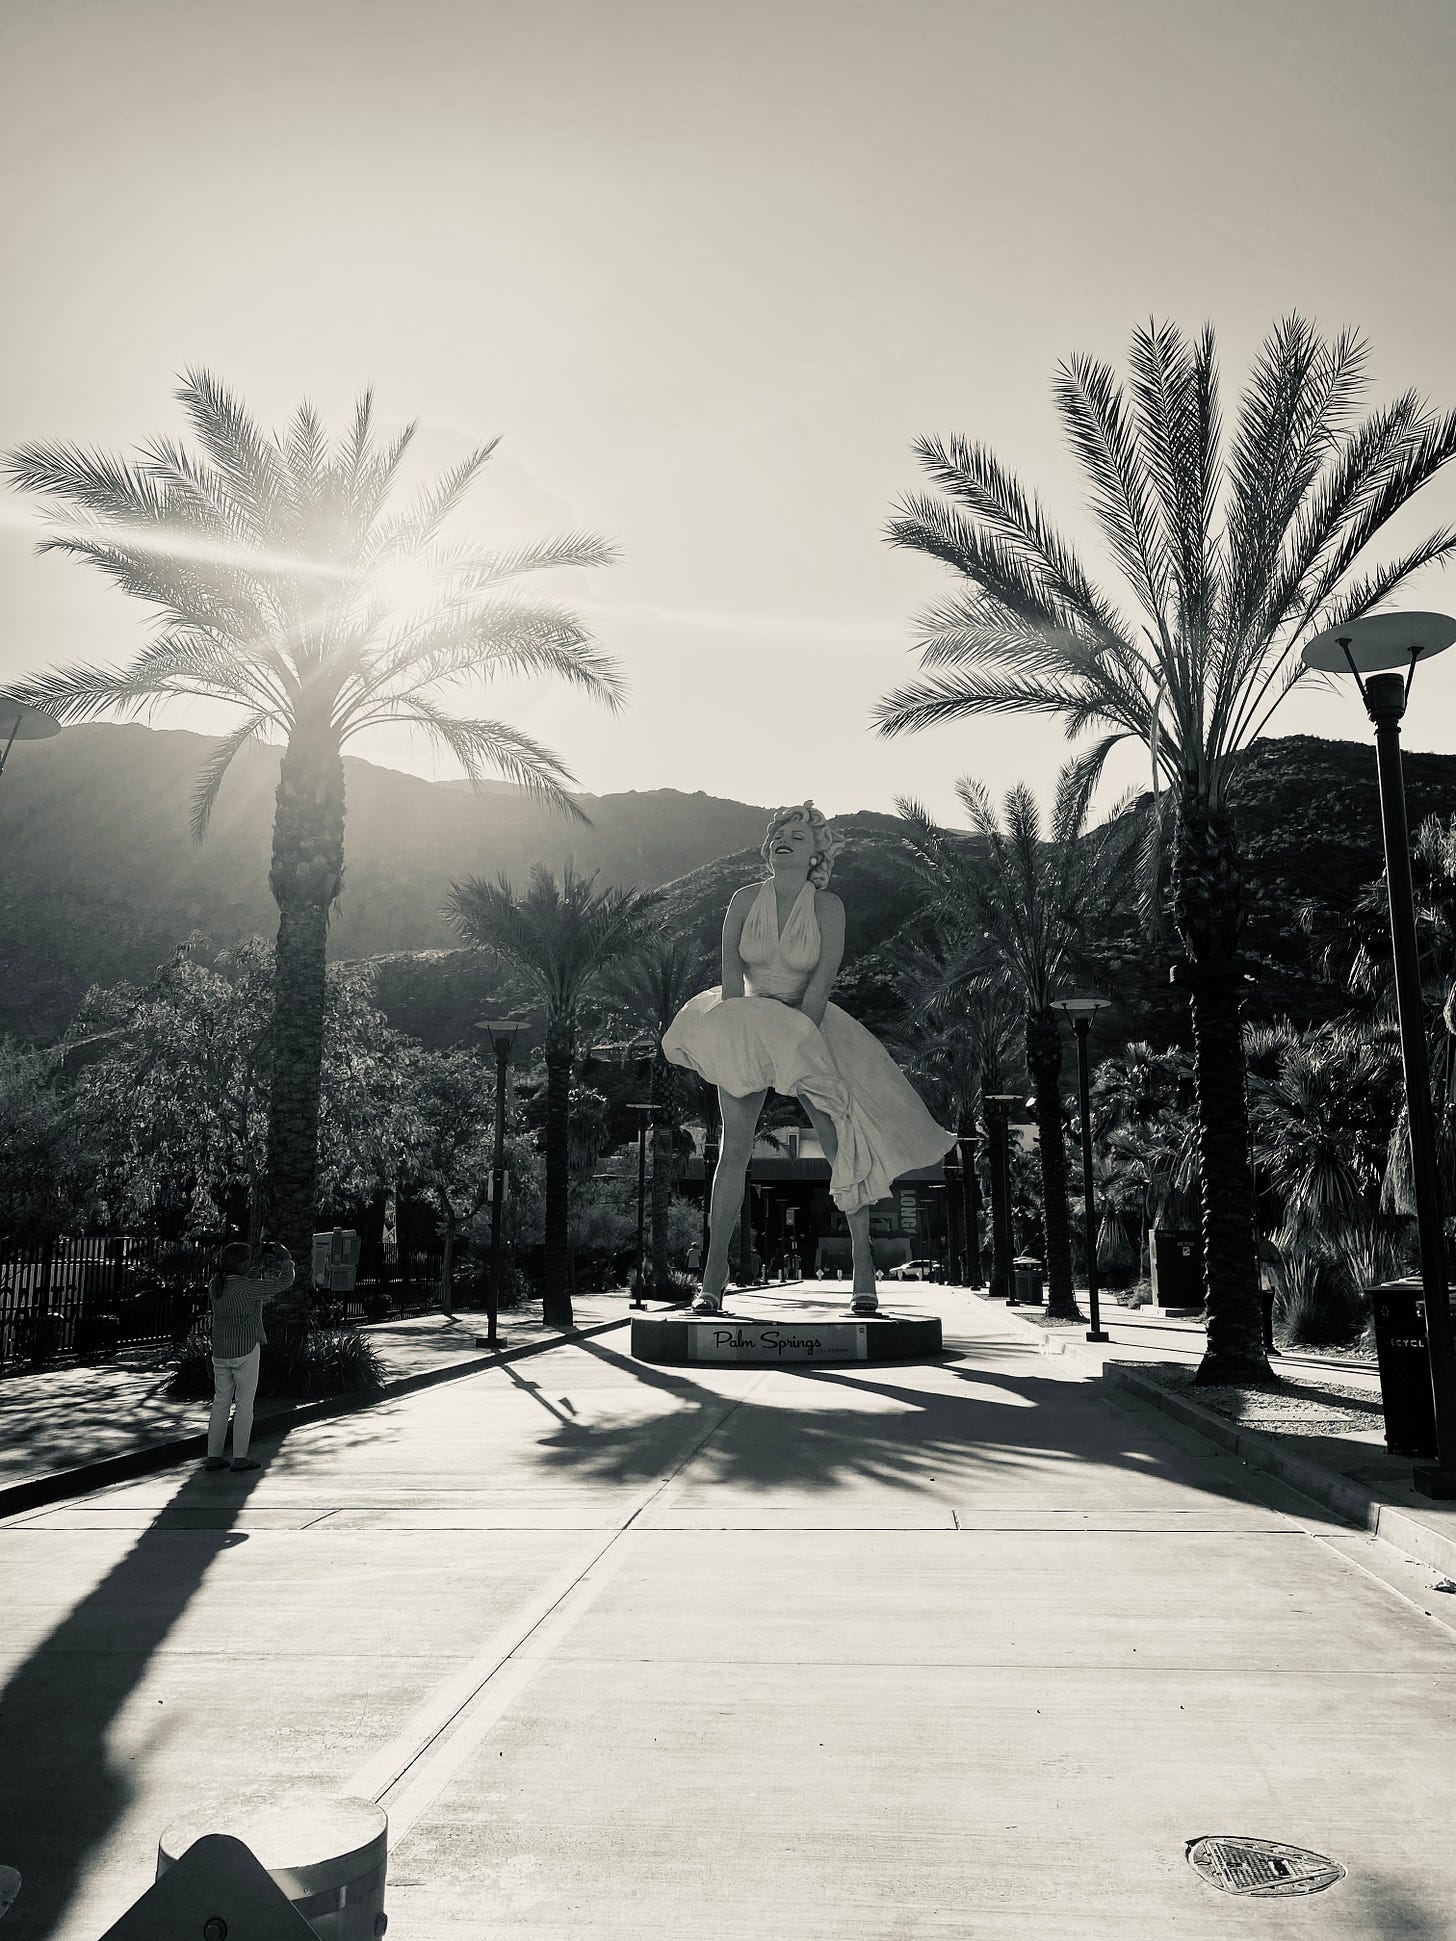 Larger than life Marilyn Monroe statute in Palm Springs, the author’s mother taking a photo off to Marilyn’s right; late sun light peaking through the palm fronds.